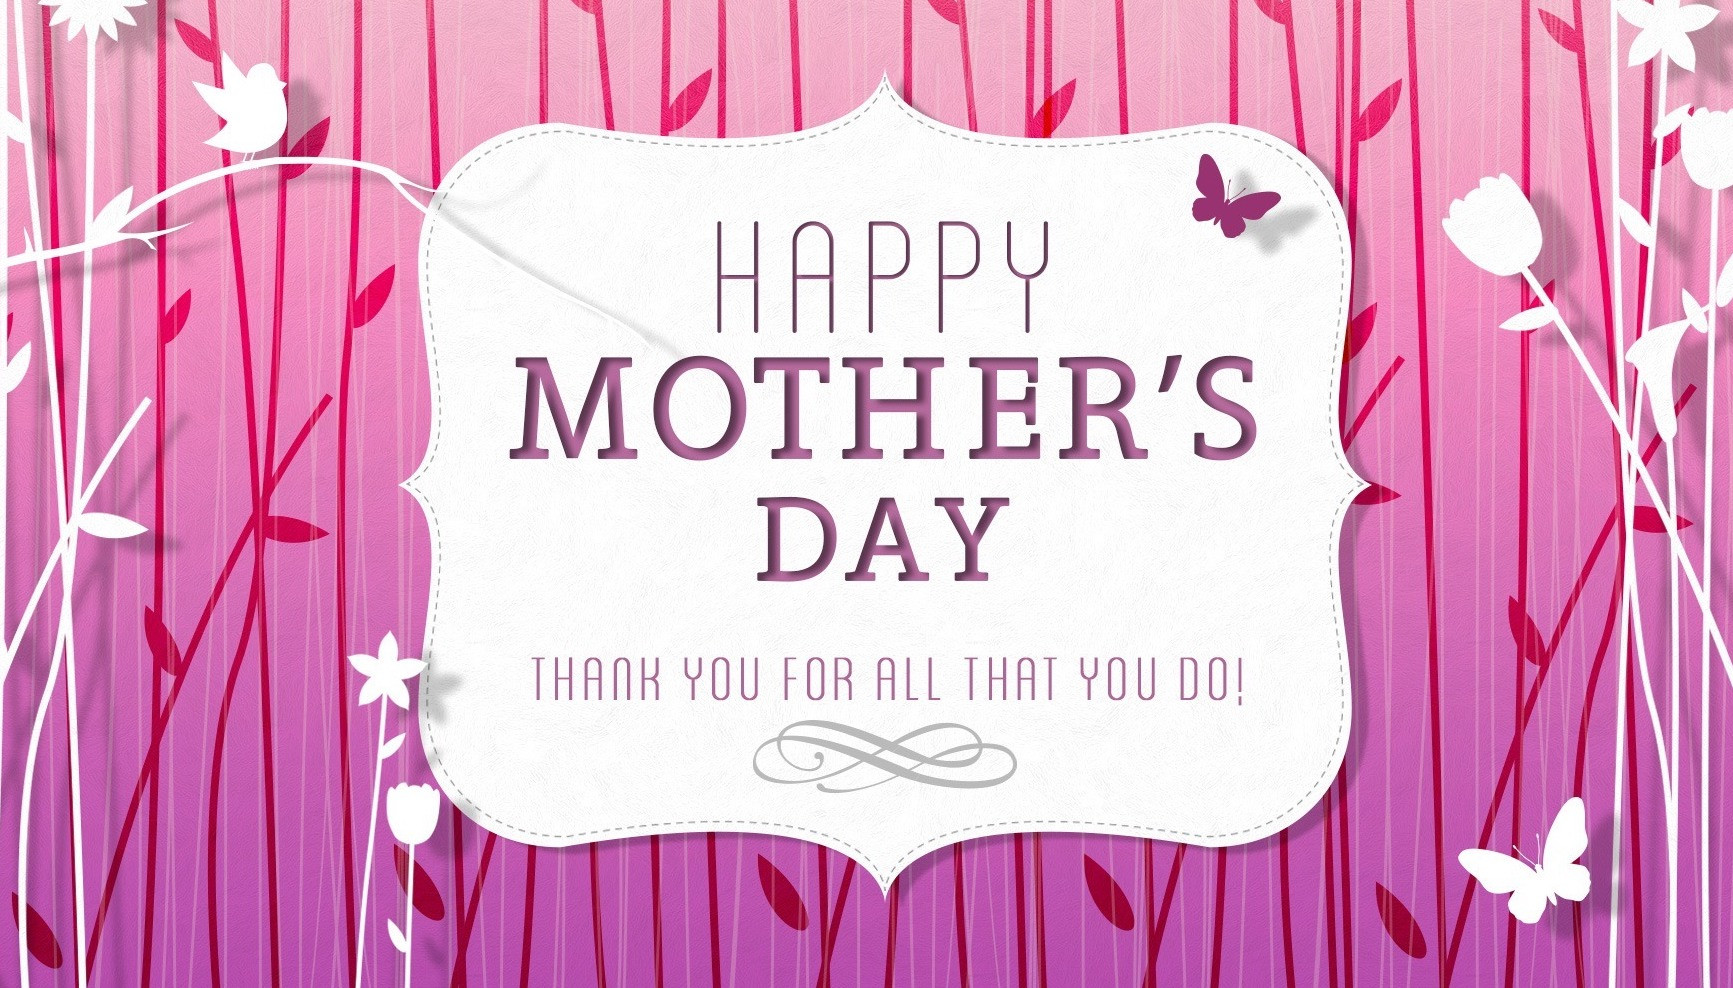 Happy Mothers Day 2017 Quotes
 Happy Mother s Day Wishes Quotes Sayings 2017 Latest